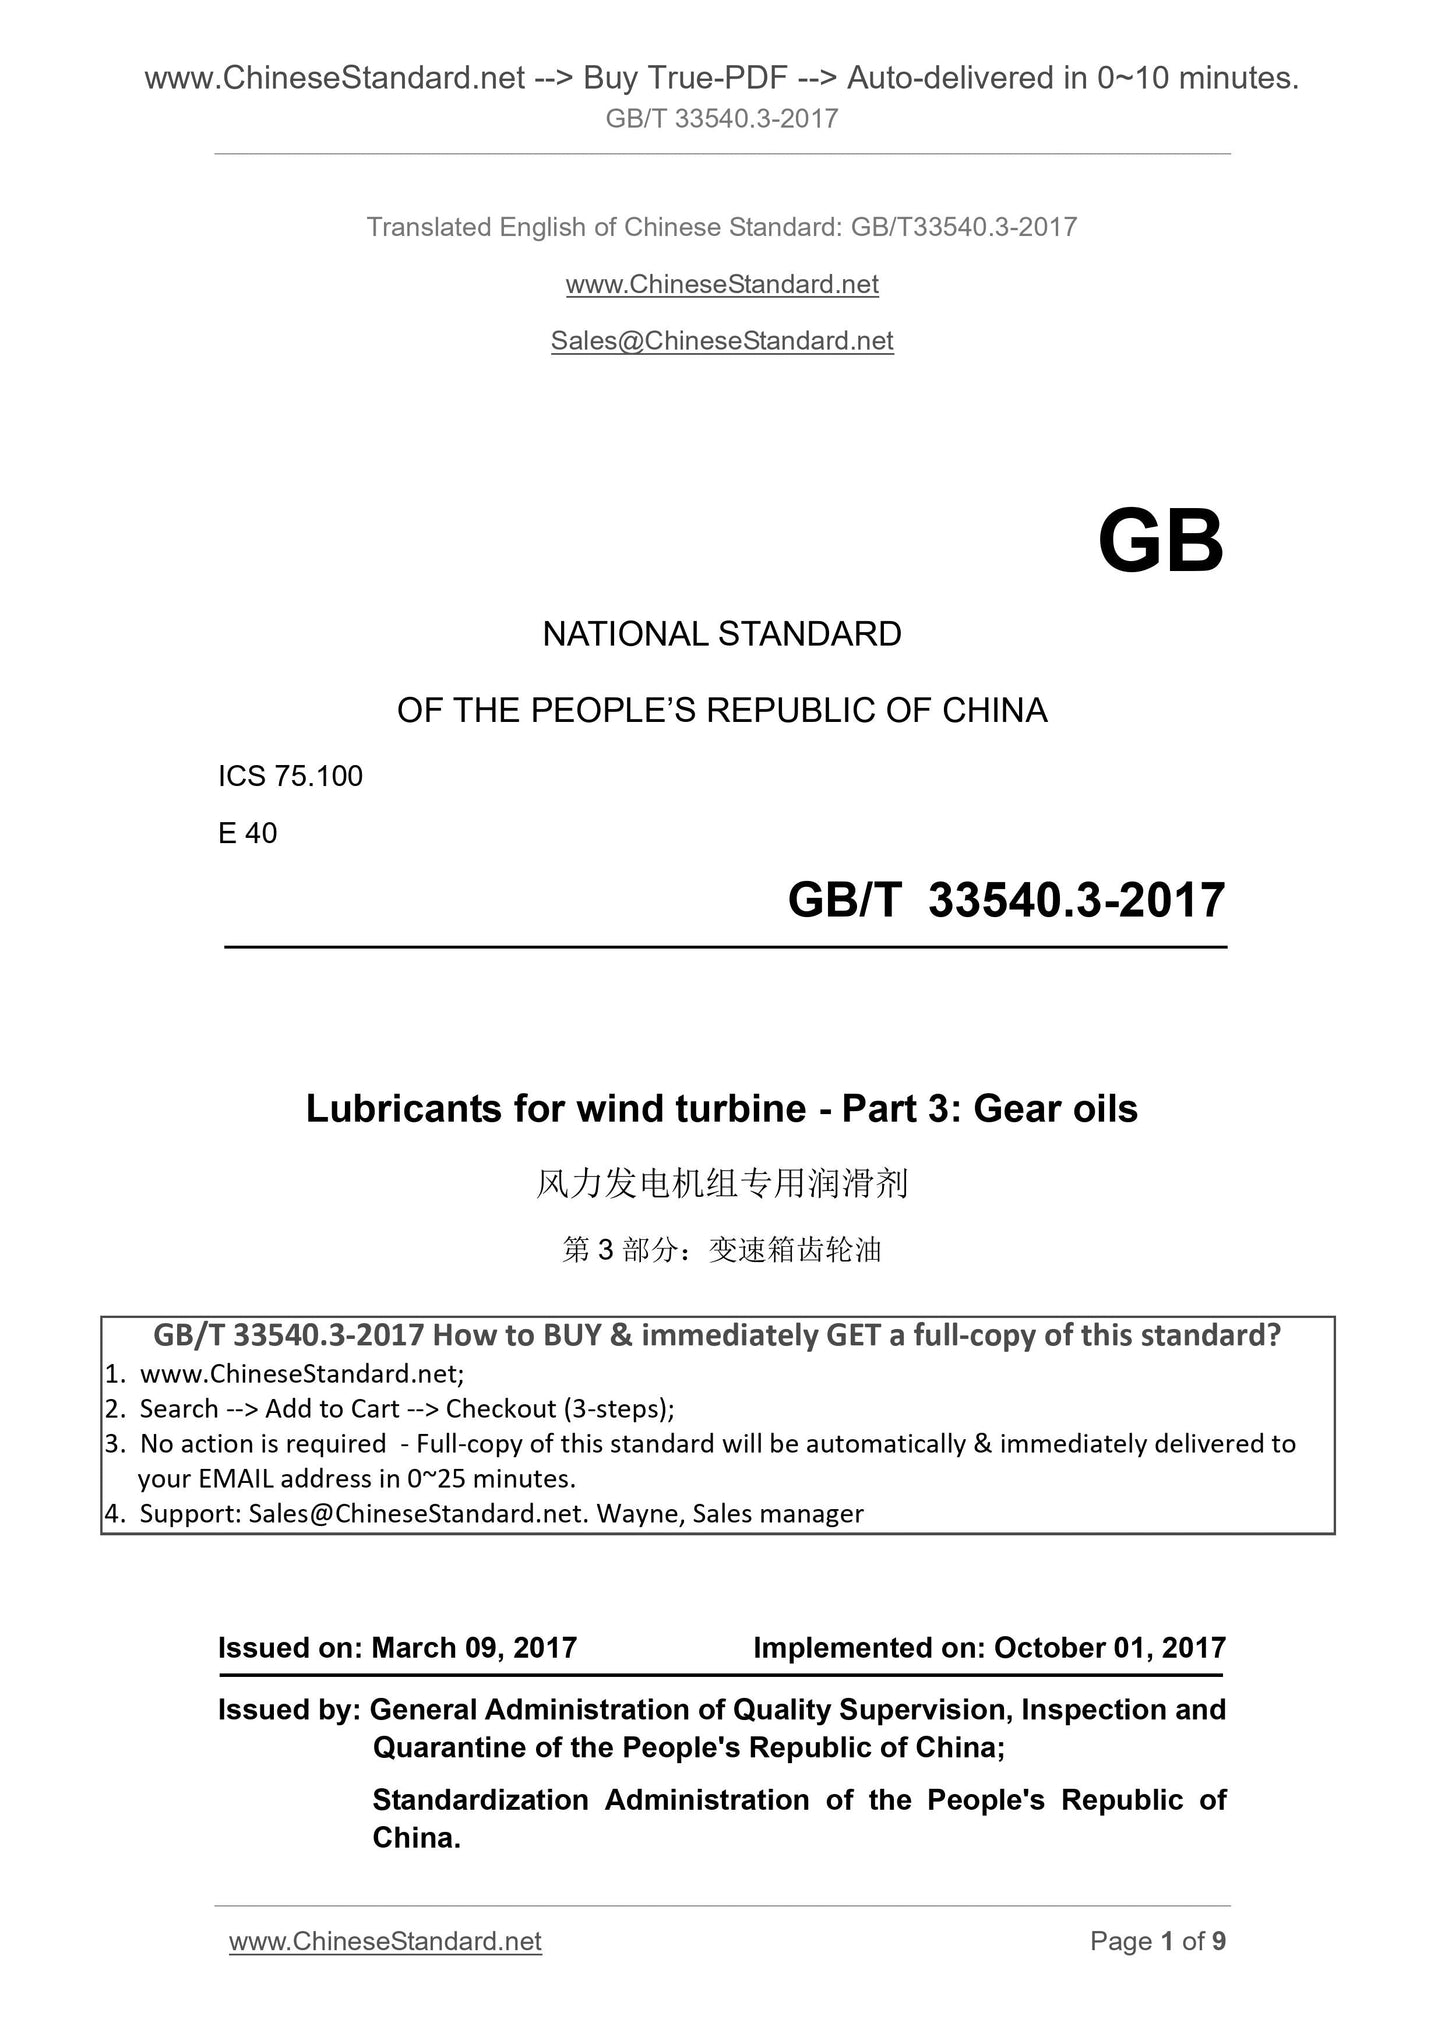 GB/T 33540.3-2017 Page 1